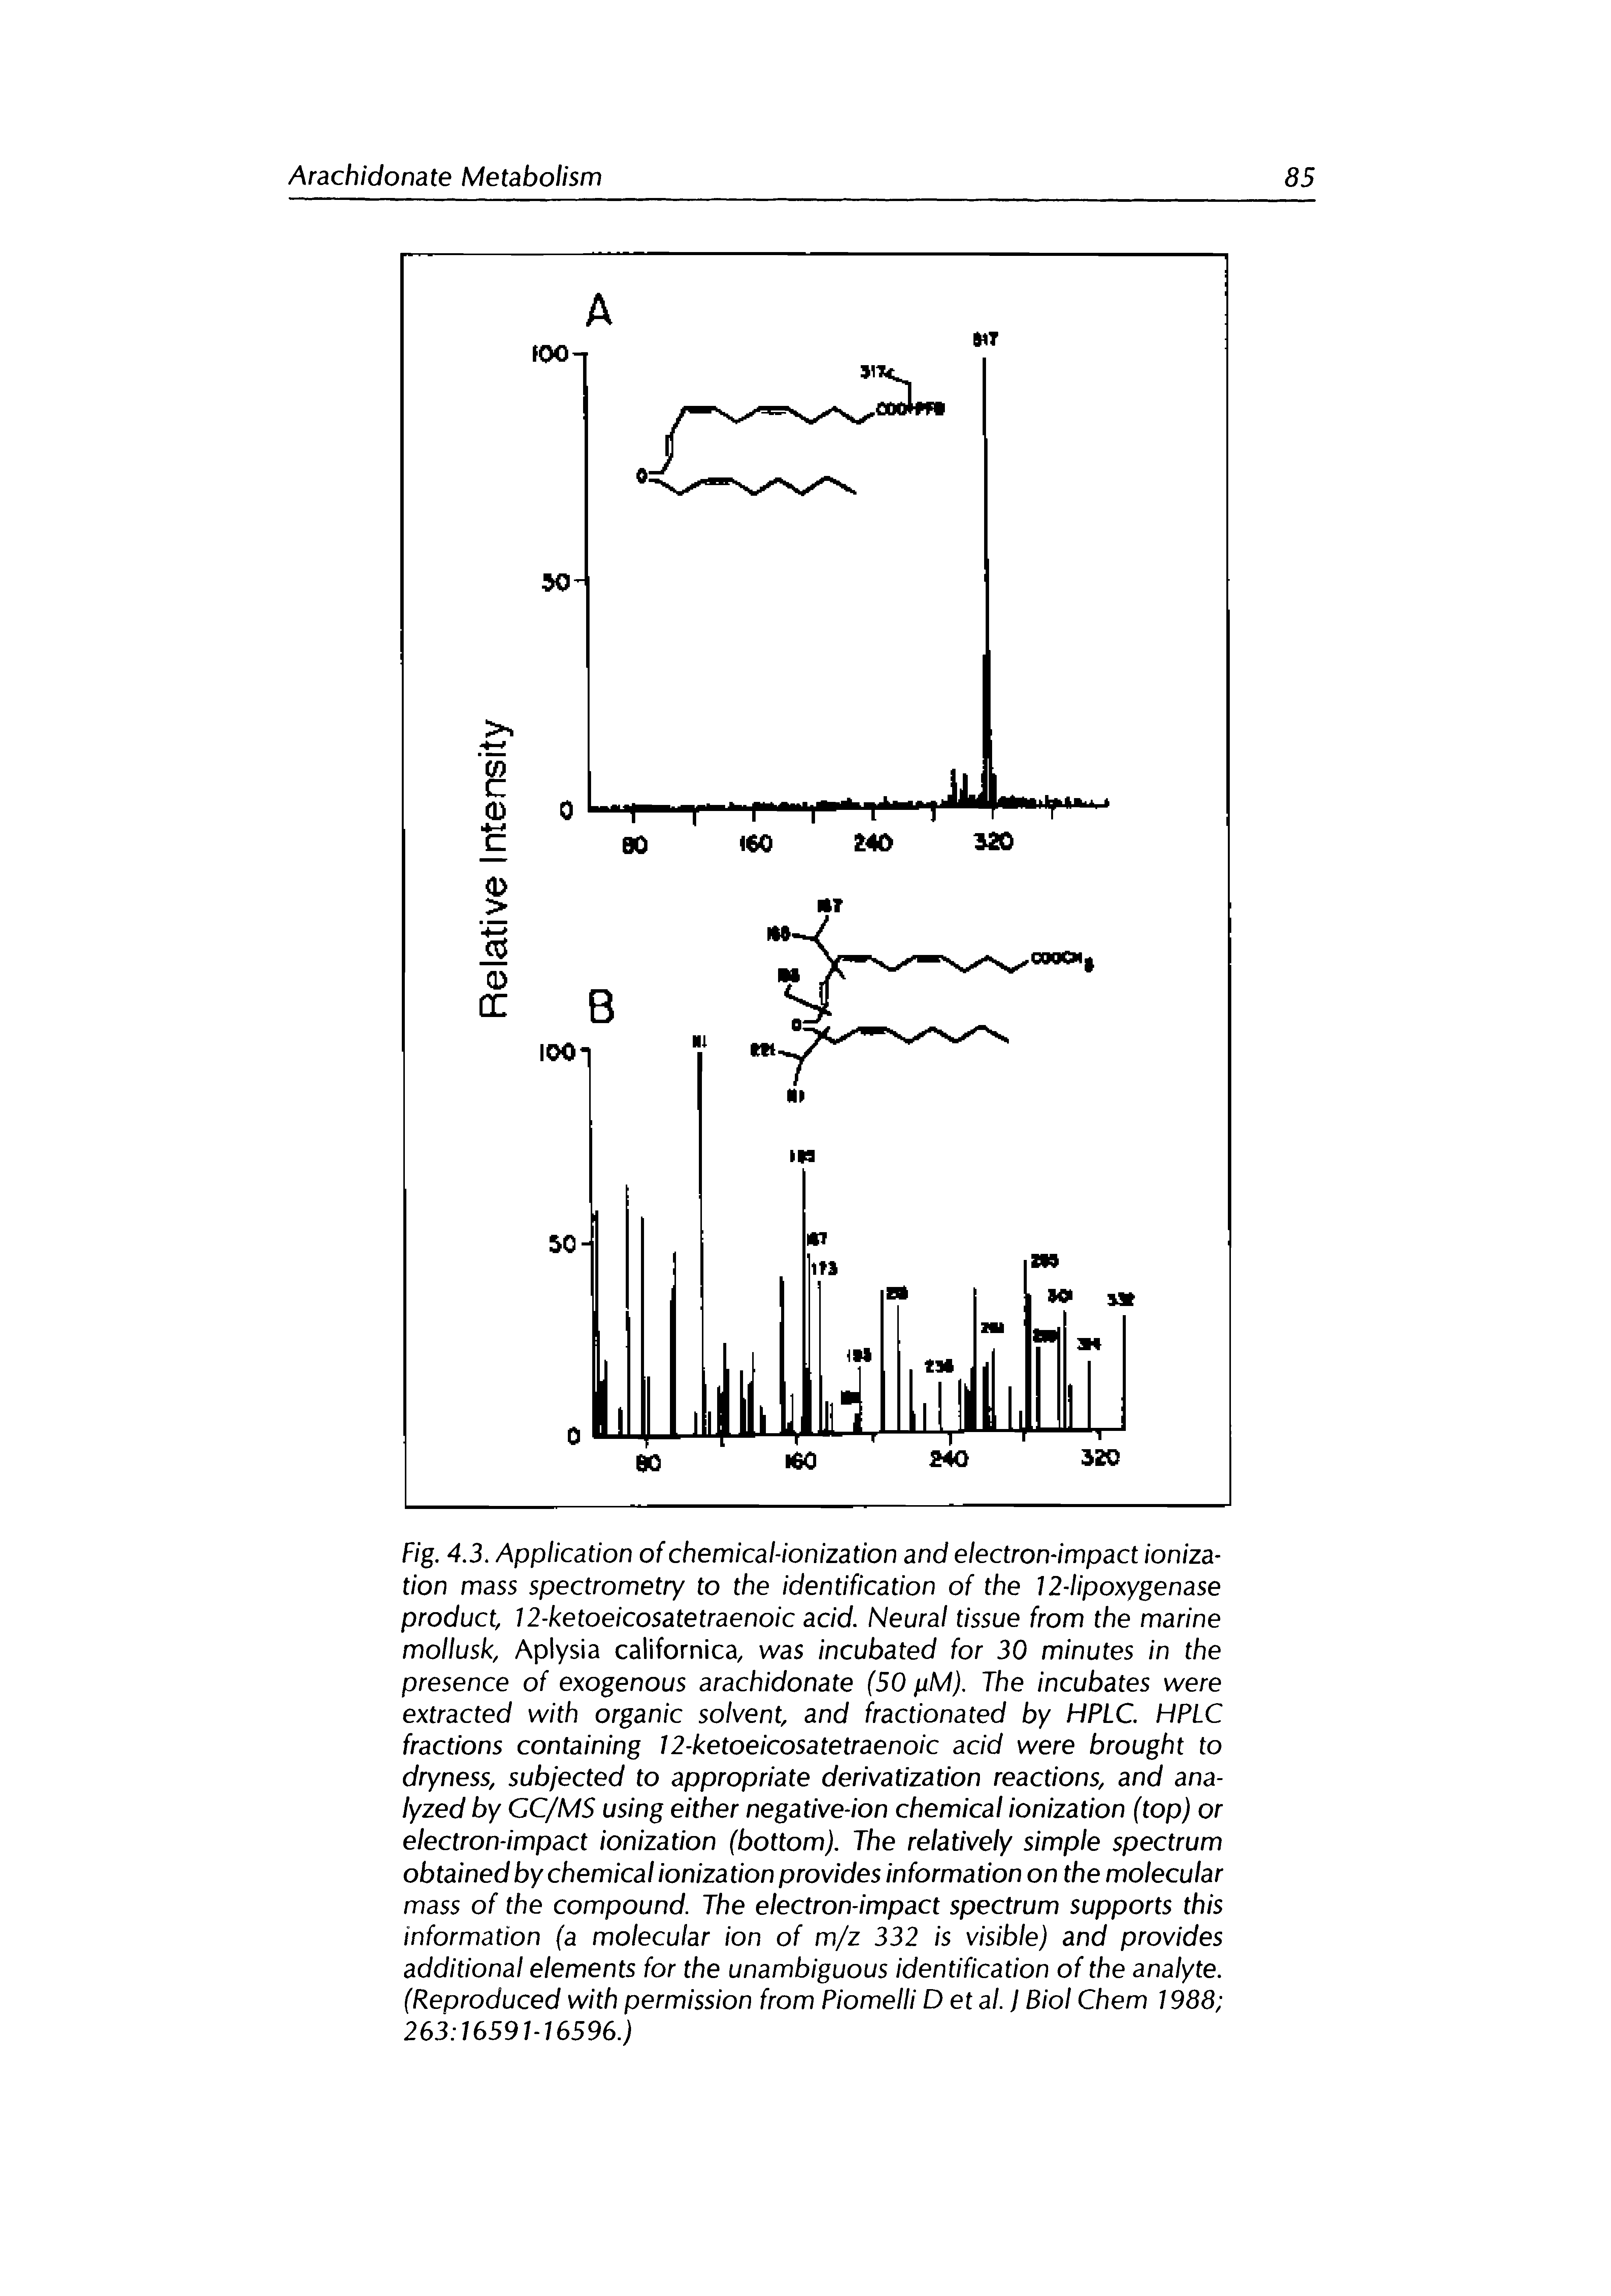 Fig. 4.3. Application of chemical-ionization and electron-impact ionization mass spectrometry to the identification of the 12-lipoxygenase product, 12-ketoeicosatetraenoic acid. Neural tissue from the marine mollusk, Aplysia californica, was incubated for 30 minutes in the presence of exogenous arachidonate (50 jjM). The incubates were extracted with organic solvent, and fractionated by HPLC. HPLC fractions containing 12-ketoeicosatetraenoic acid were brought to dryness, subjected to appropriate derivatization reactions, and analyzed by GC/MS using either negative-ion chemical ionization (top) or electron-impact ionization (bottom). The relatively simple spectrum obtained by chemical ionization provides information on the molecular mass of the compound. The electron-impact spectrum supports this information (a molecular ion of m/z 332 is visible) and provides additional elements for the unambiguous identification of the analyte. (Reproduced with permission from Piomelli Detal.J Biol Chem 1988 263 16591-16596.)...